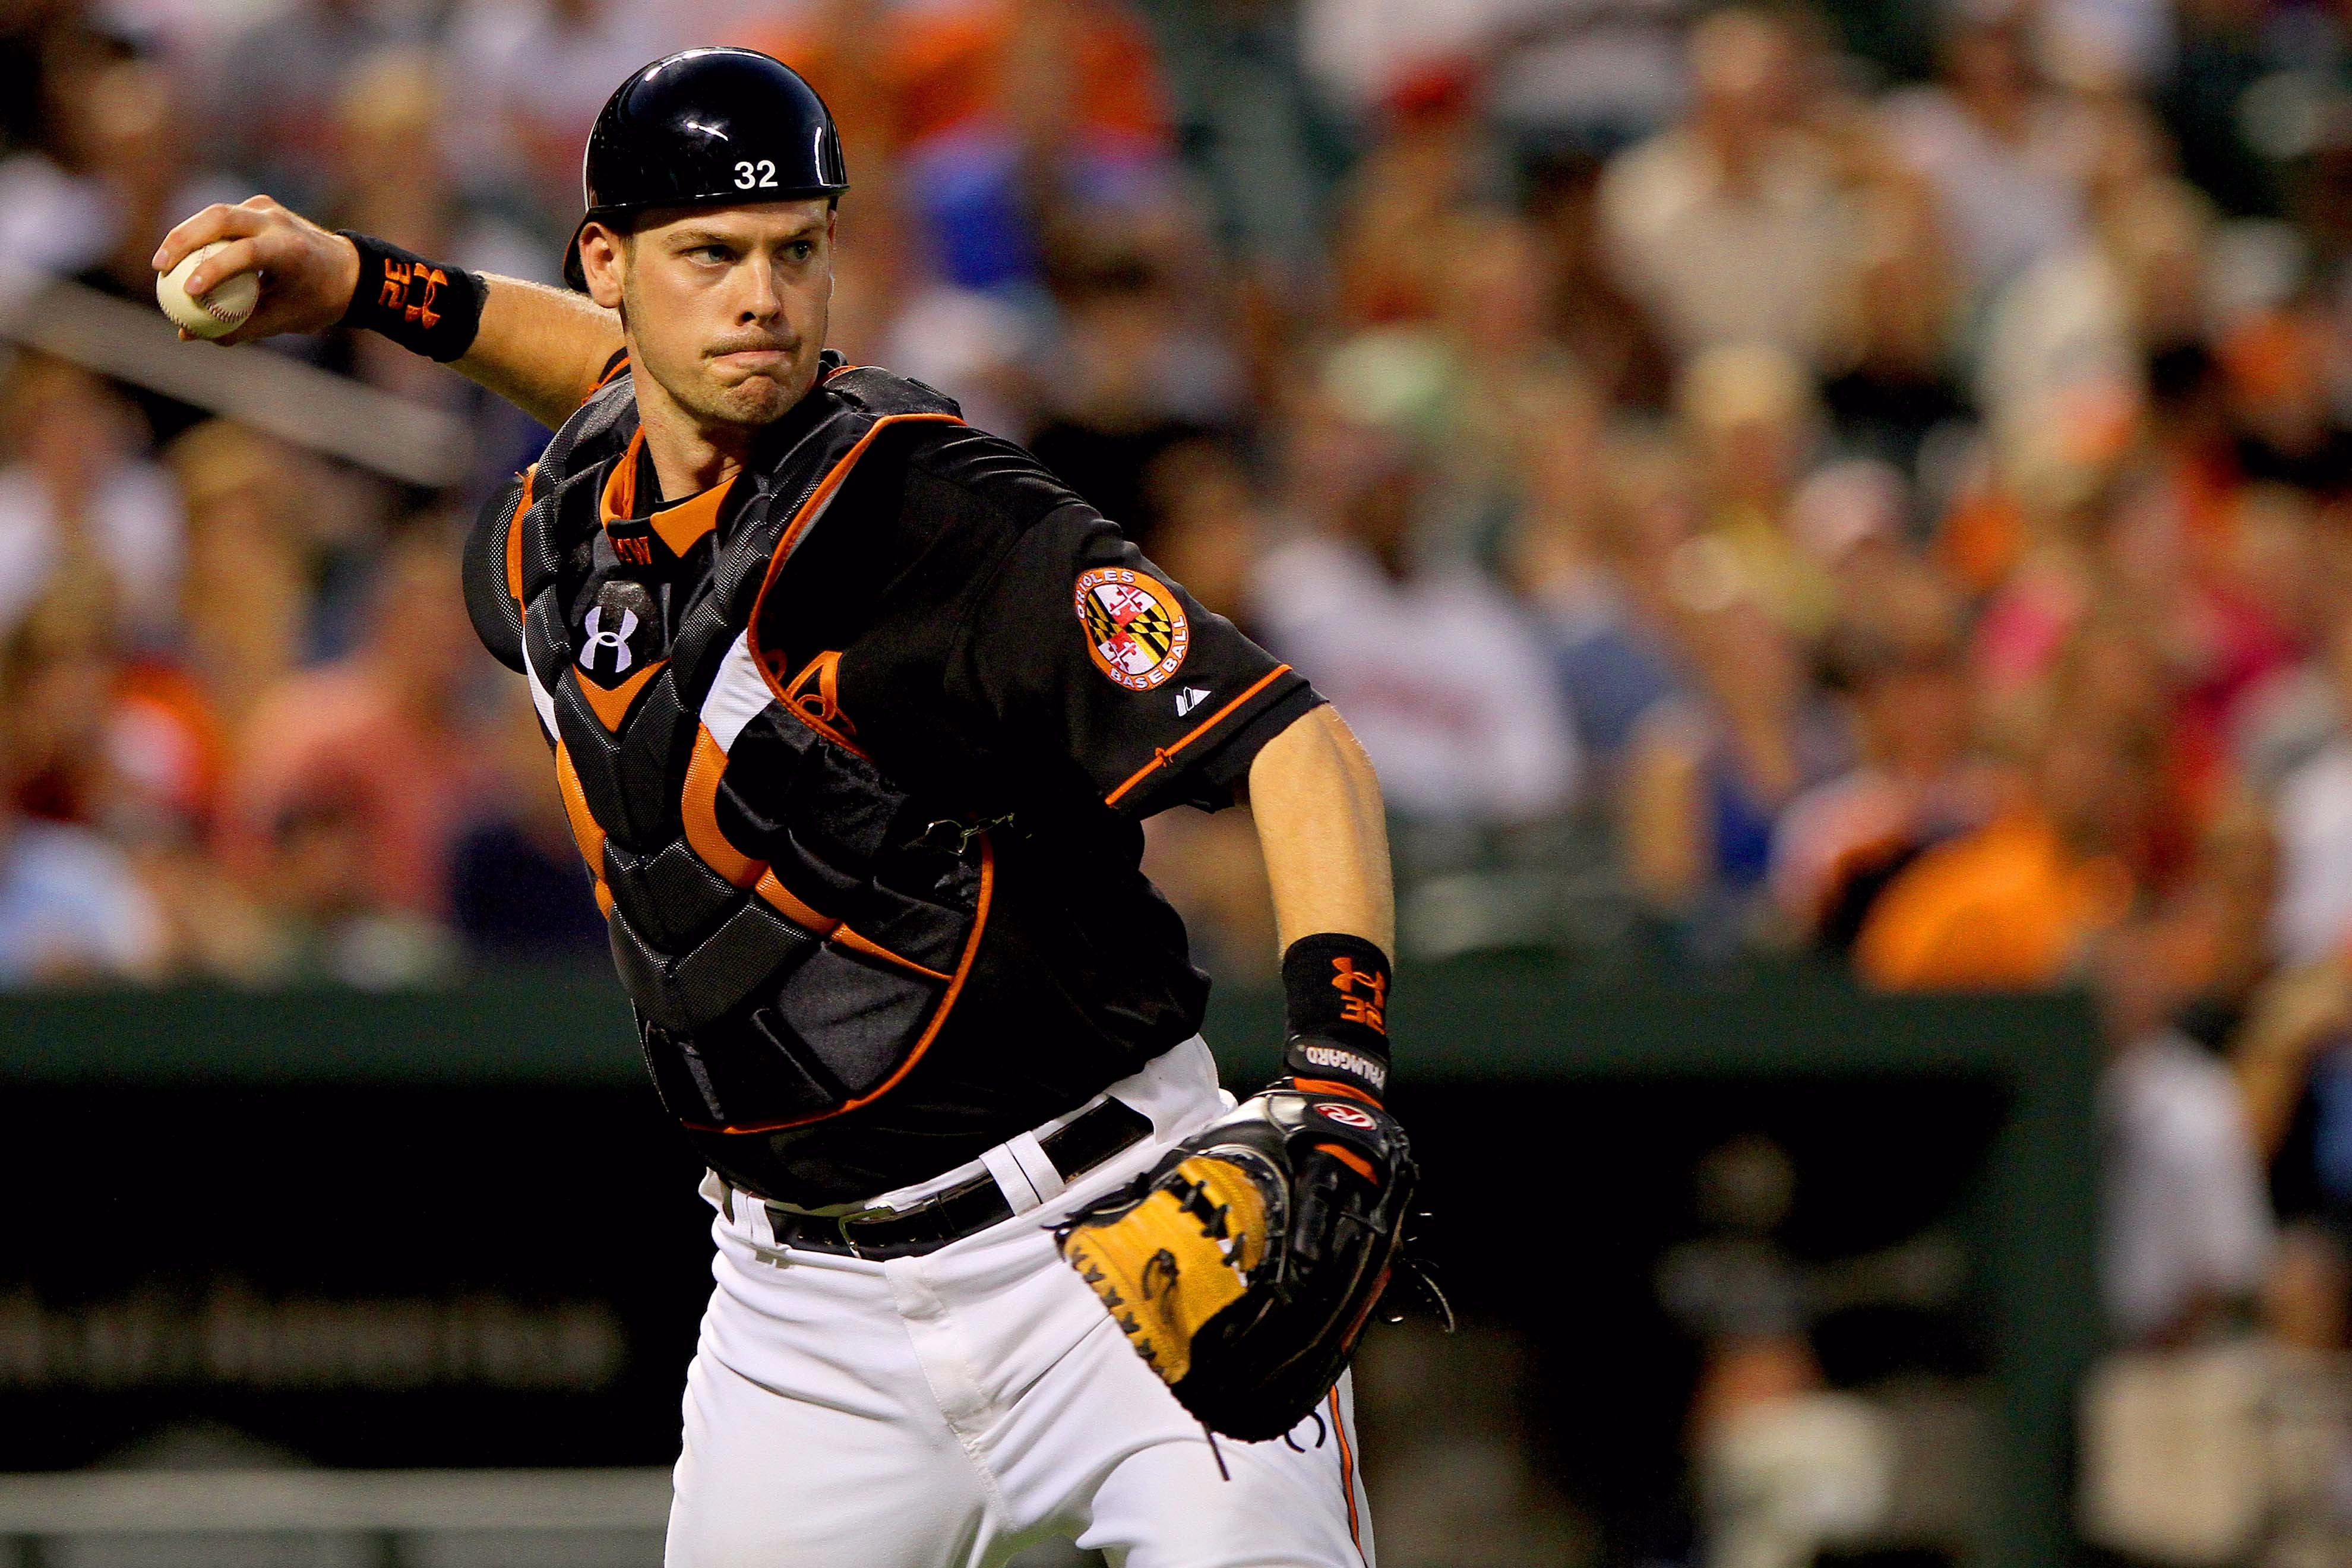 Matt Wieters Sweepstakes: Will There Be a Seat Left for Him?